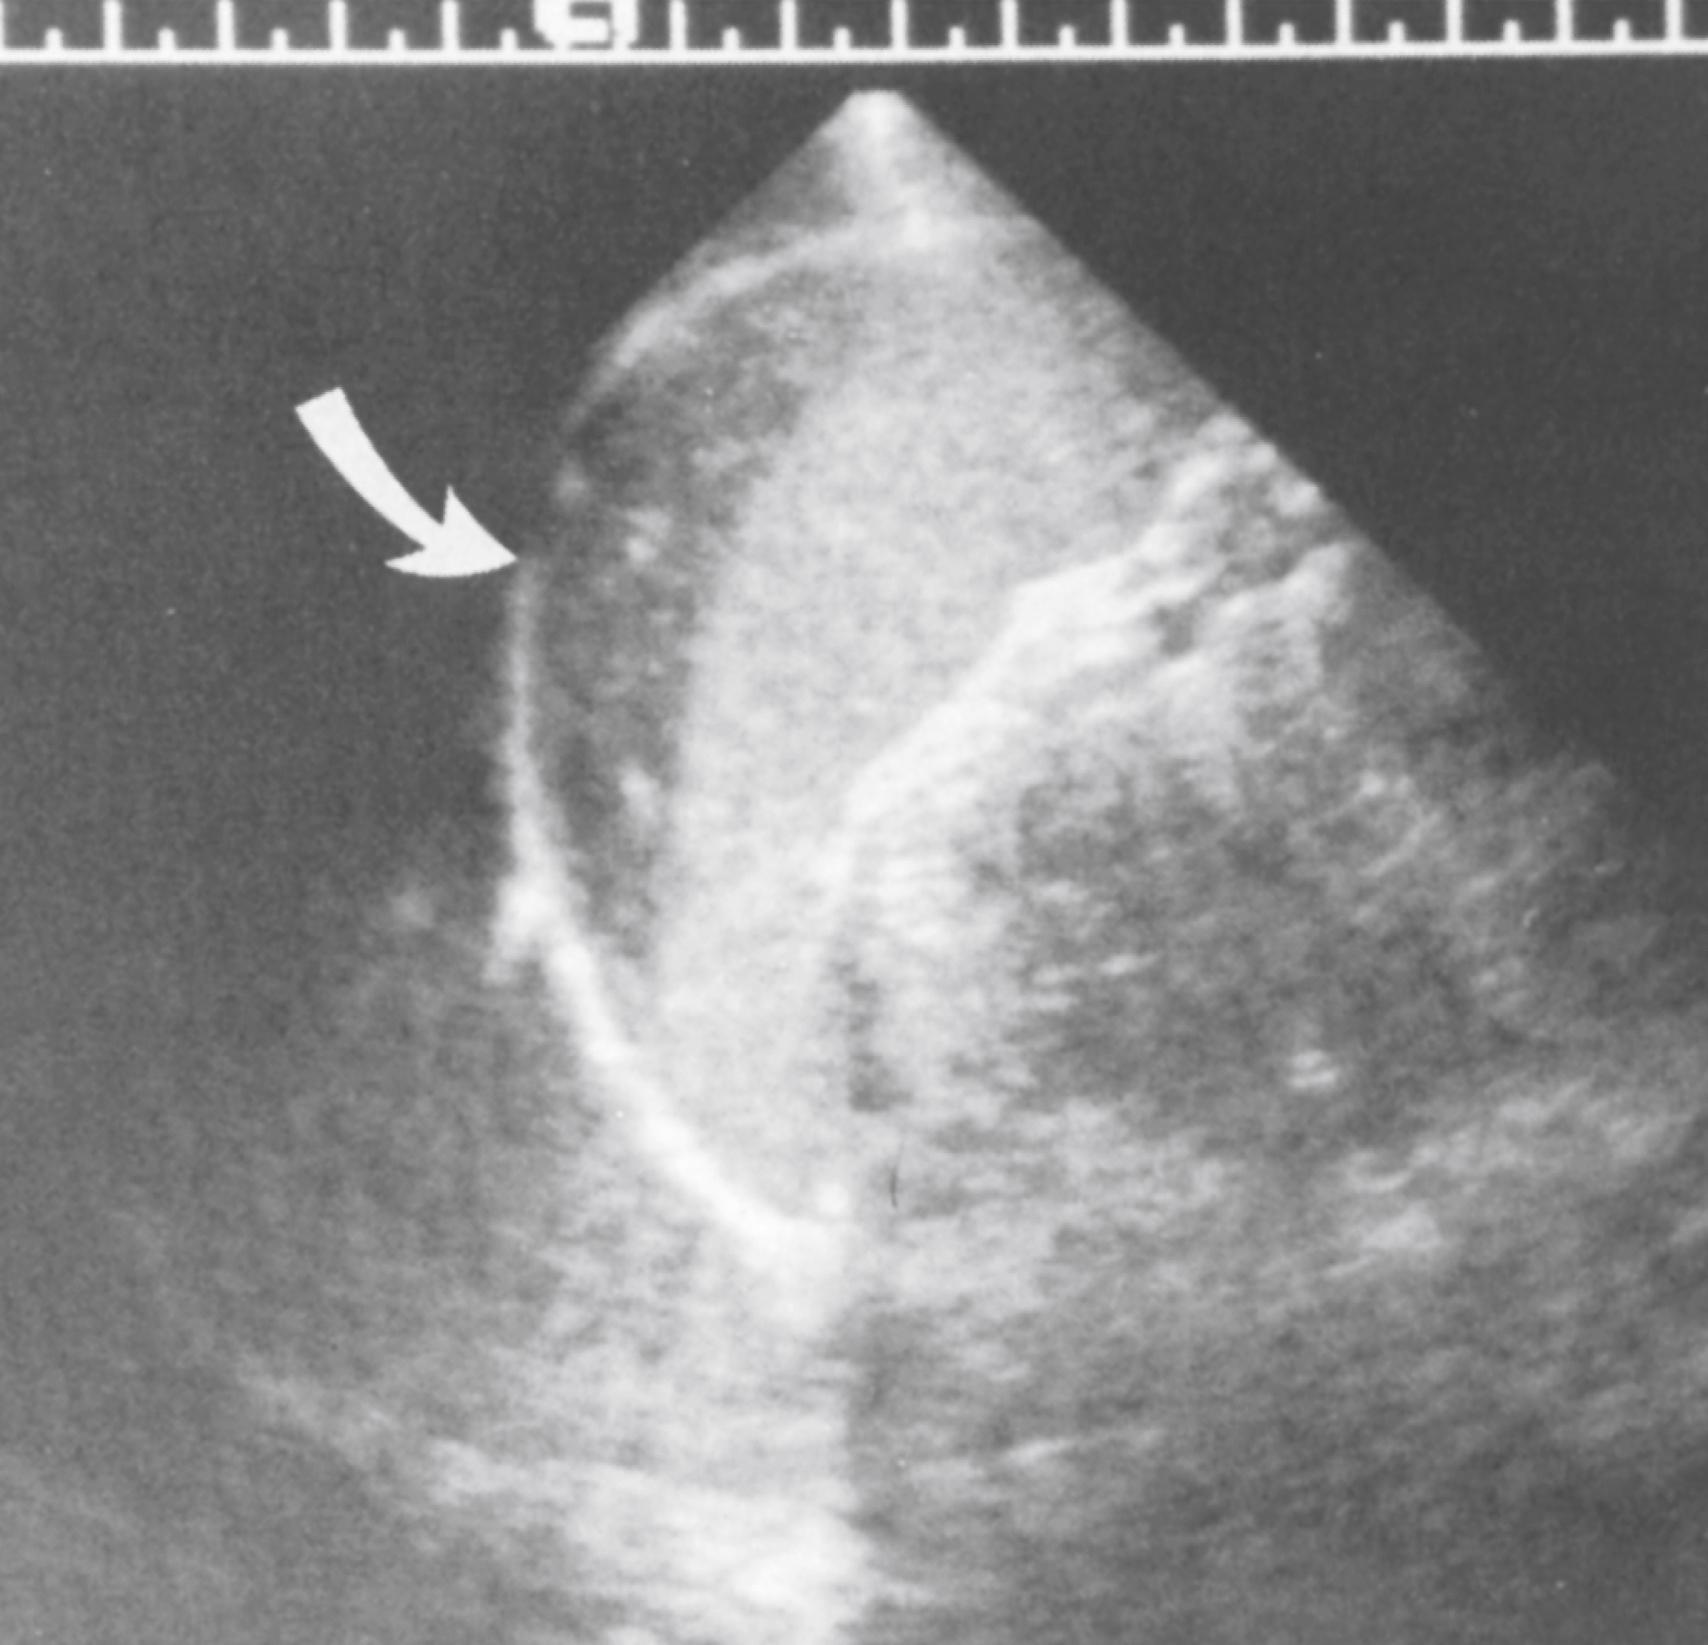 Fig. 20.7, The subcapsular splenic hematoma (arrow) in a 15-year-old boy who had been in a motor vehicle crash was best seen on coronal scans through the left intercostal spaces.